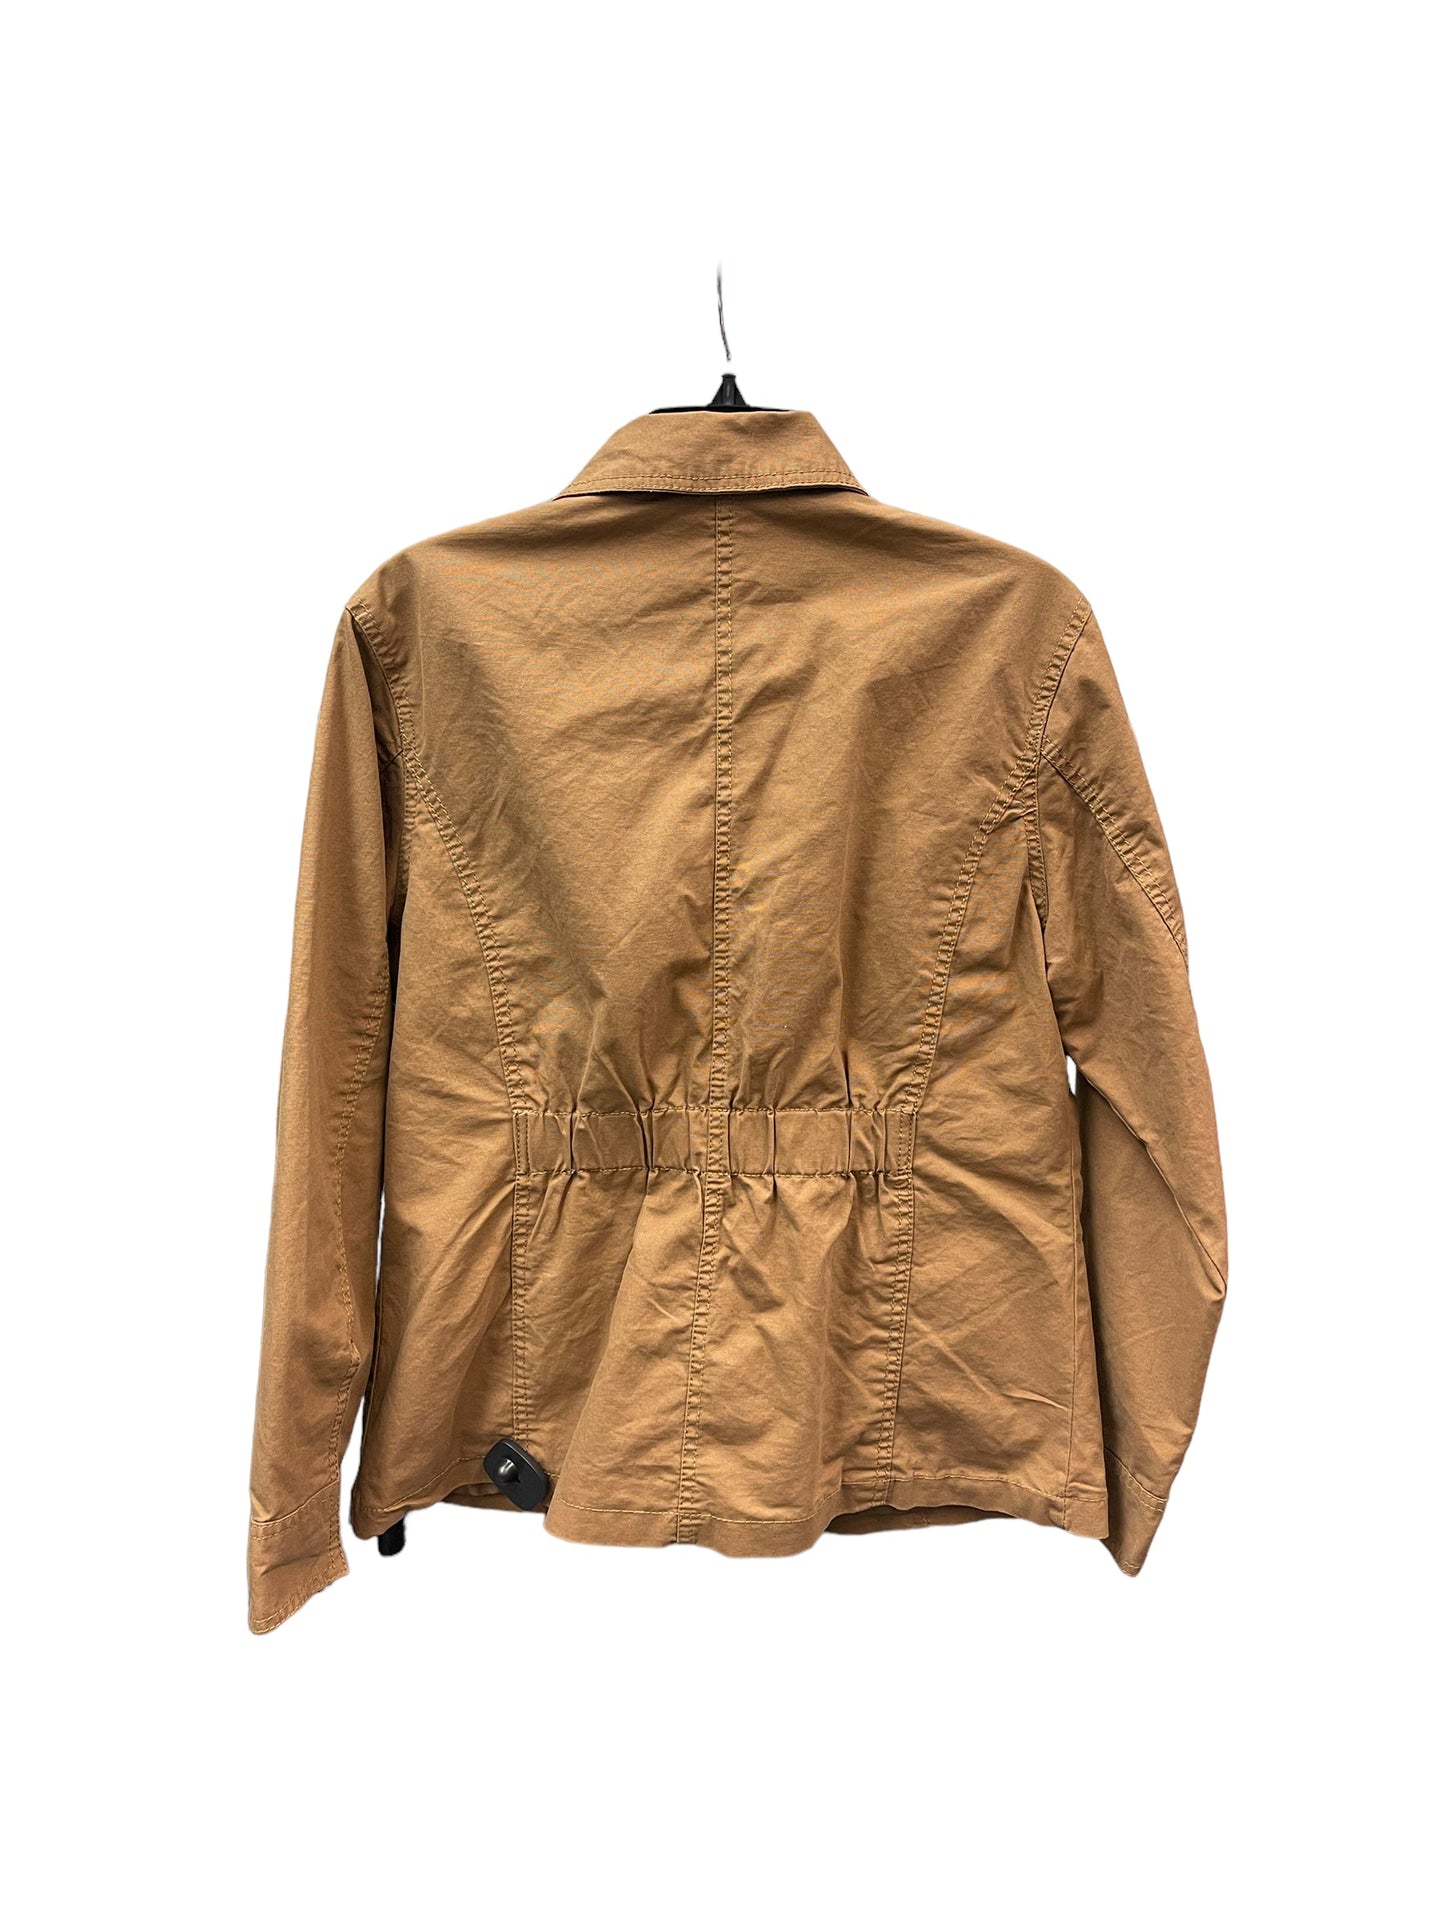 Jacket Other By Universal Thread  Size: M